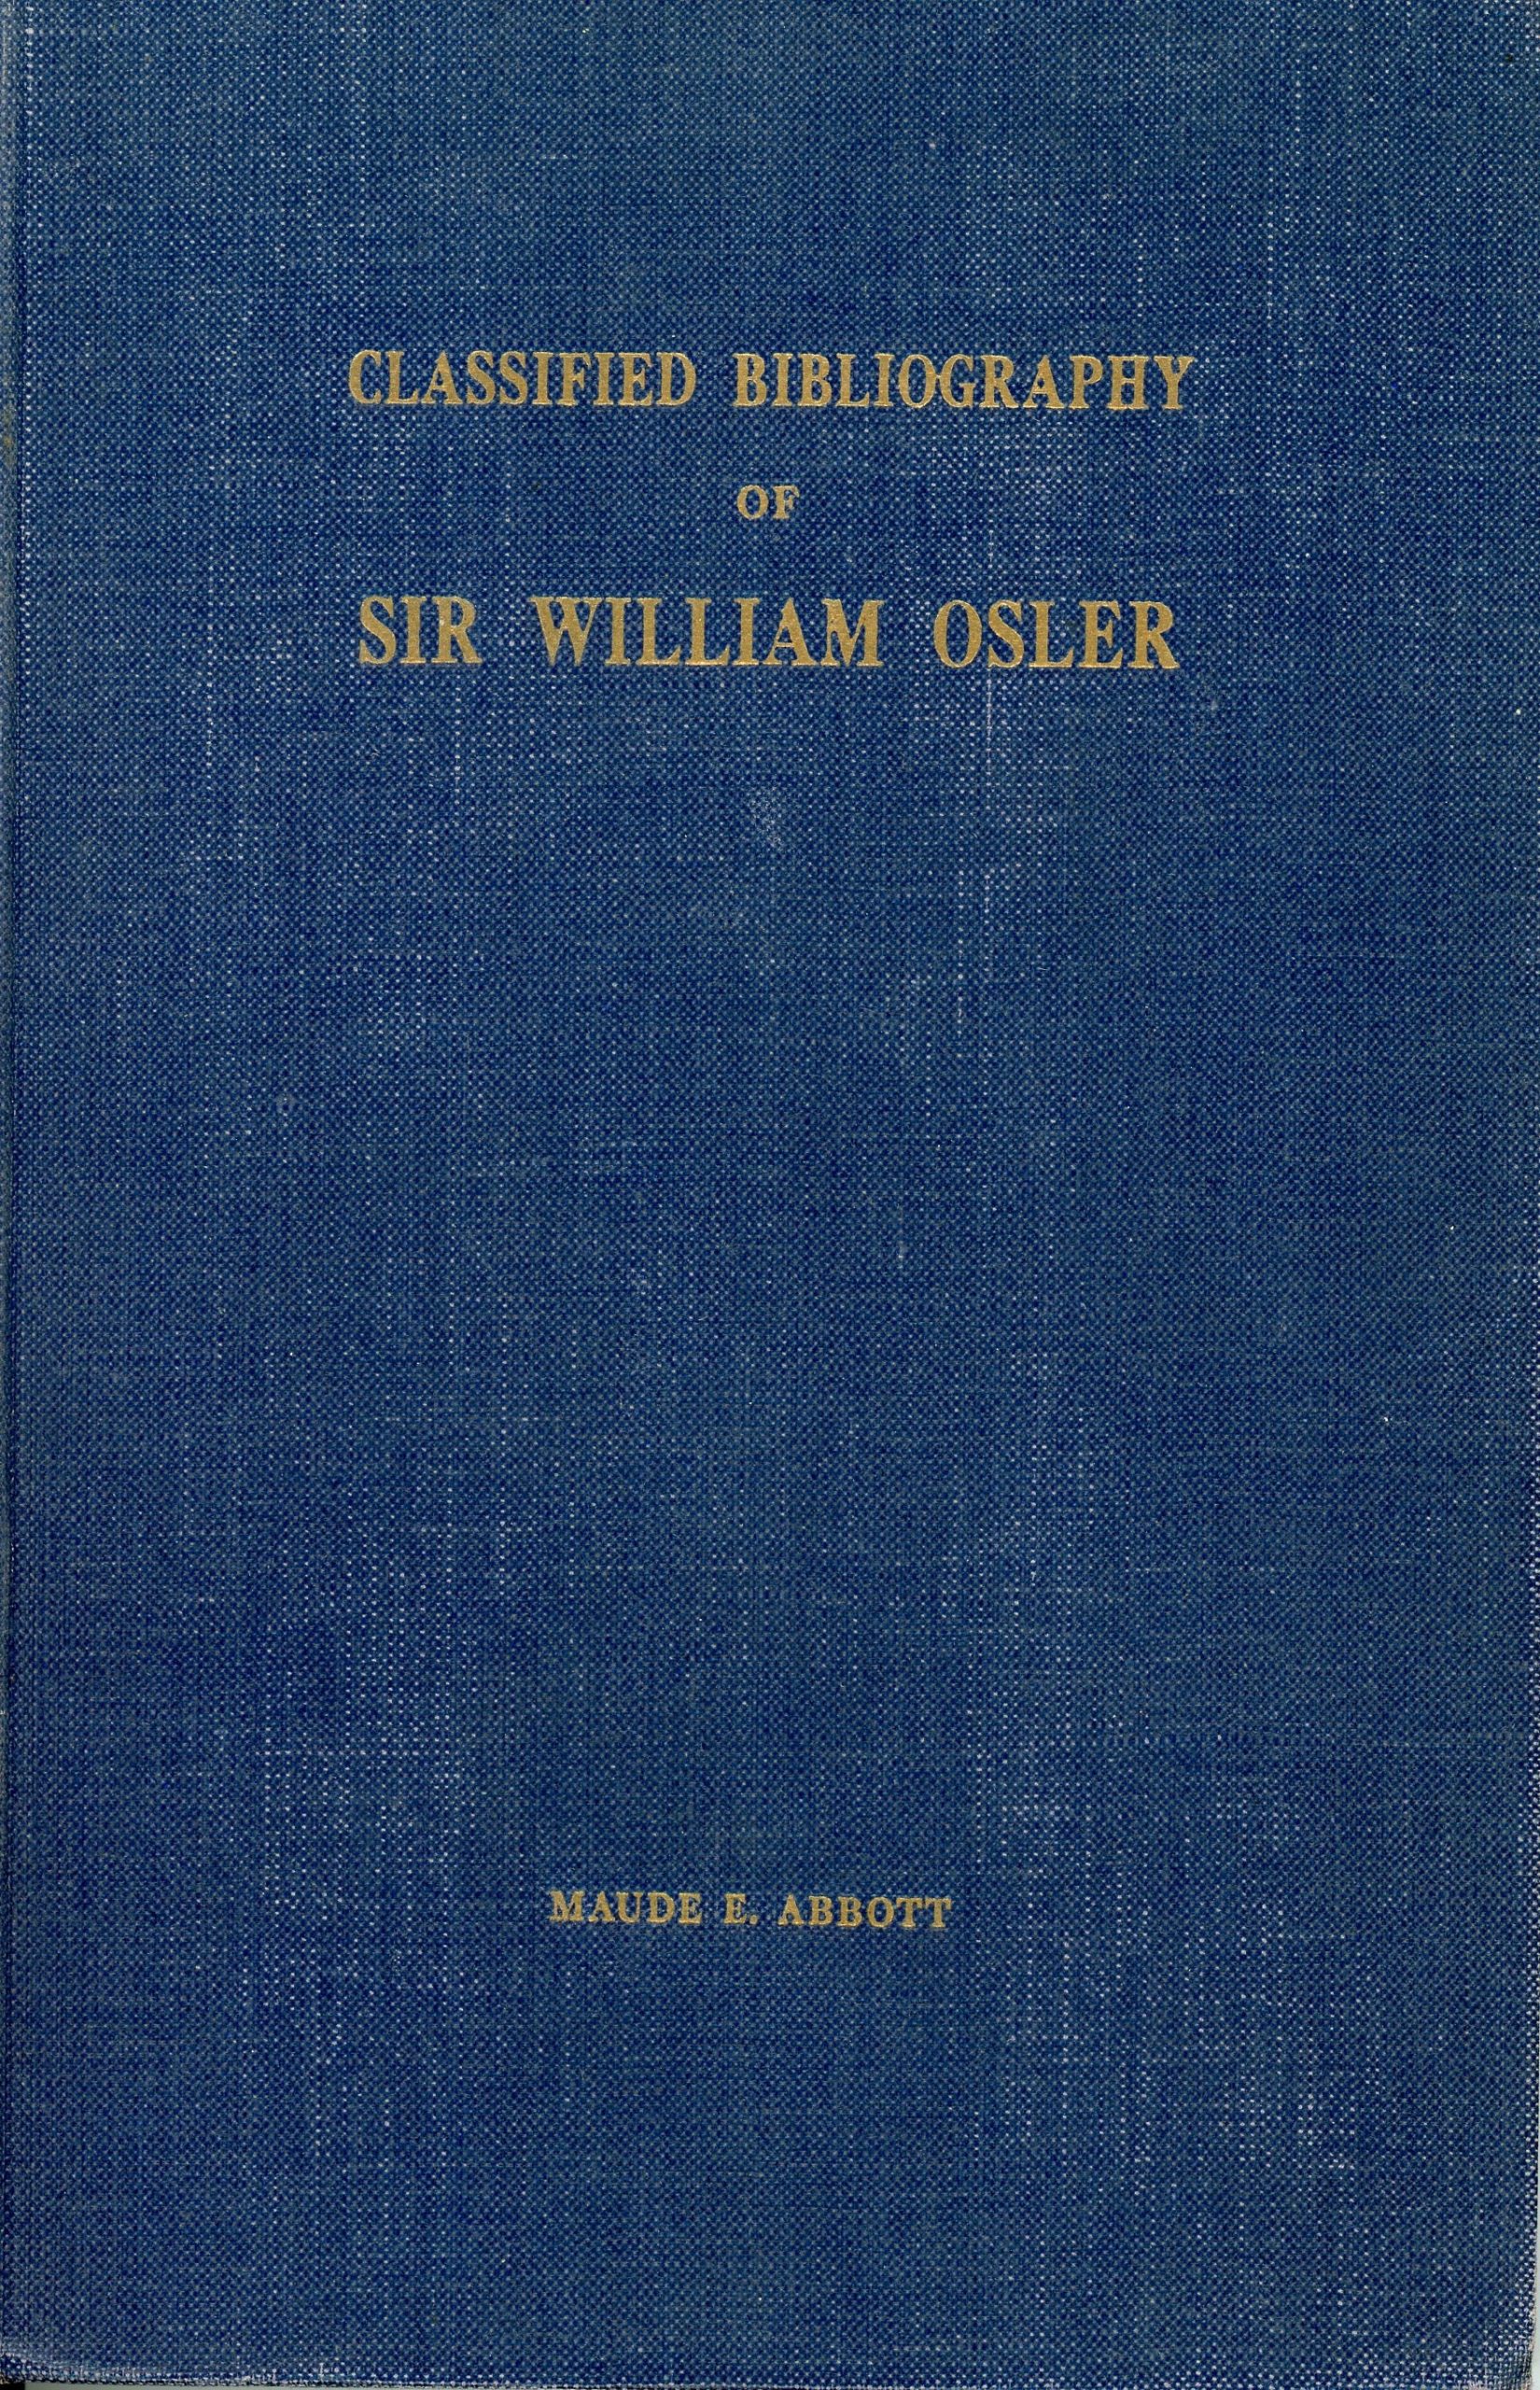 Book cover. The book is blue with the following title in gold lettering: “Classified Bibliography of Sir William Osler Maude E. Abbot”